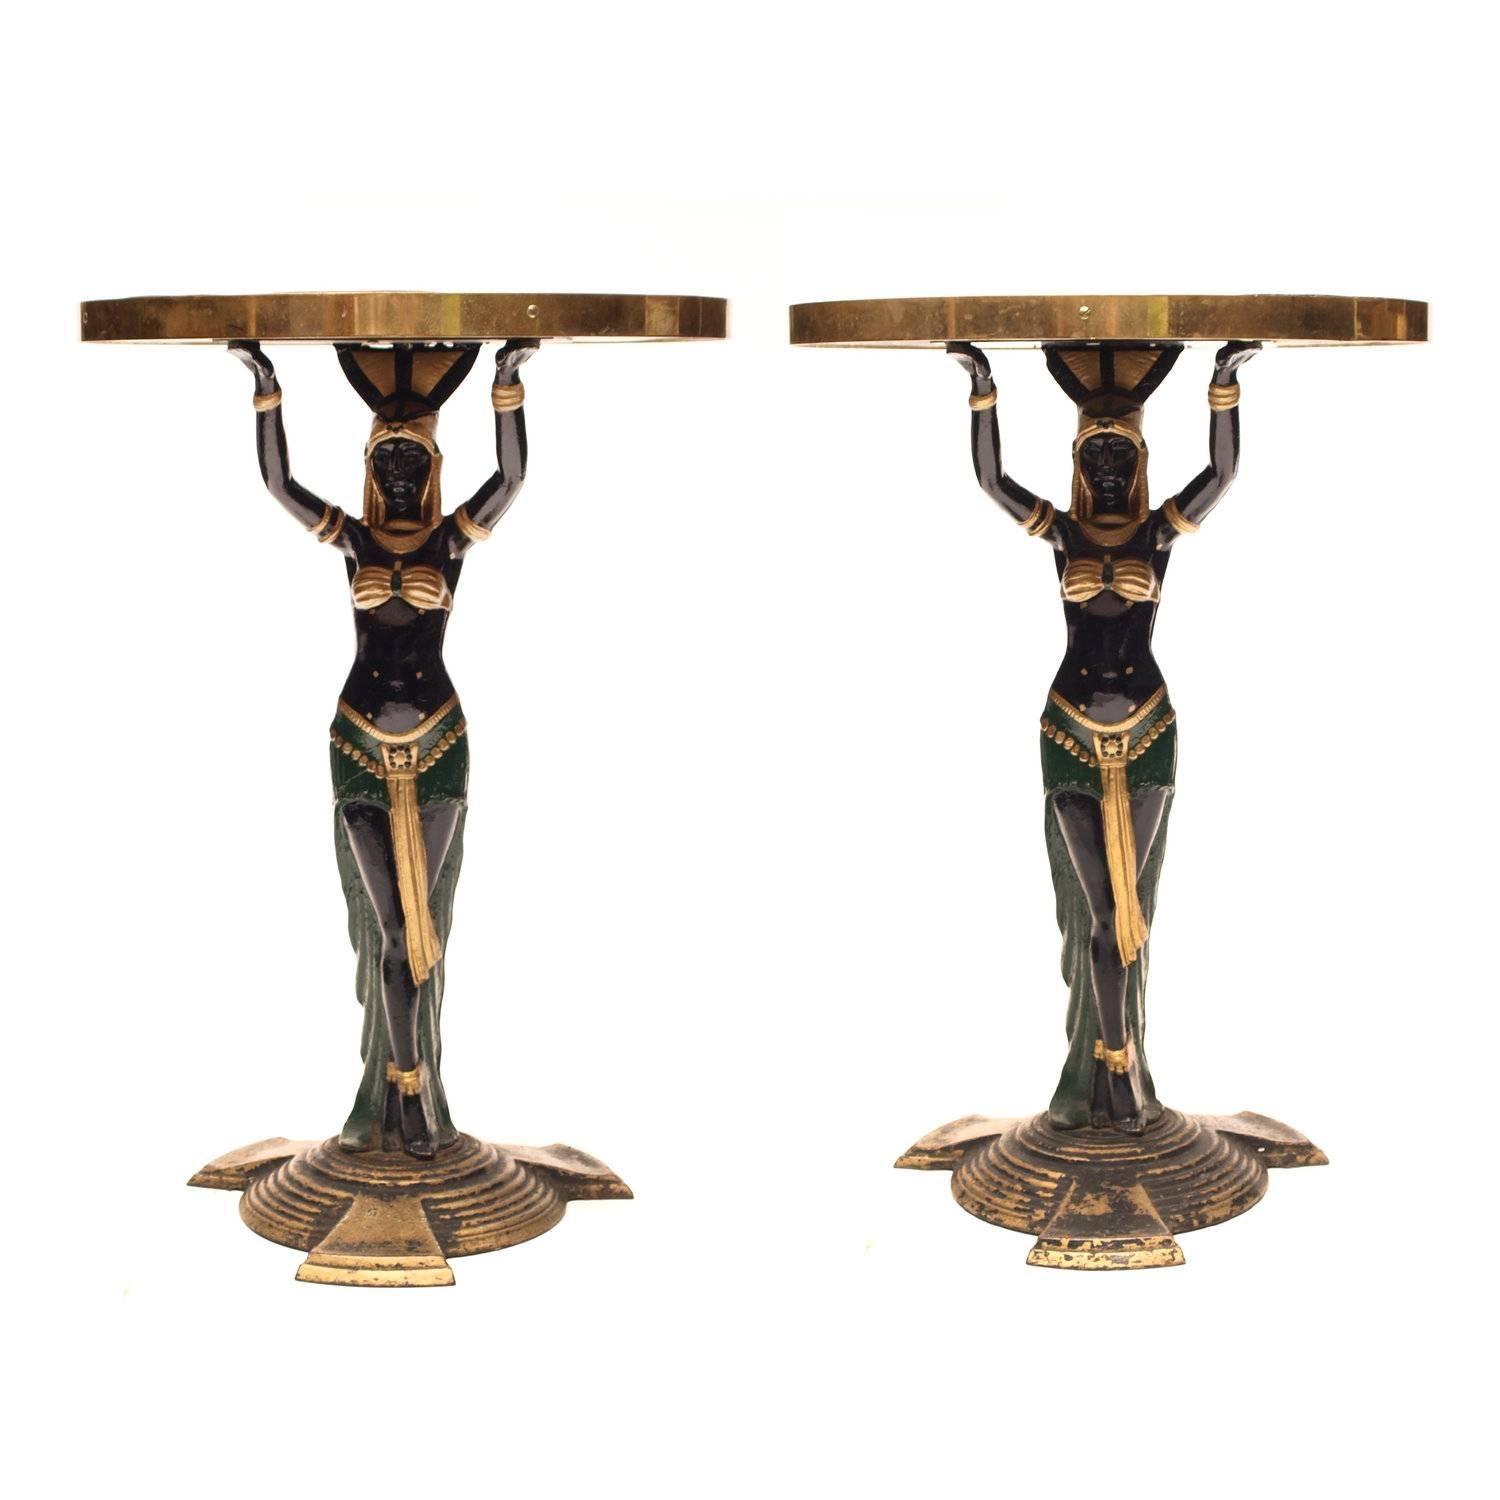 Pair of Art Deco Side Tables Egyptian Revival Cast Iron, circa 1920s